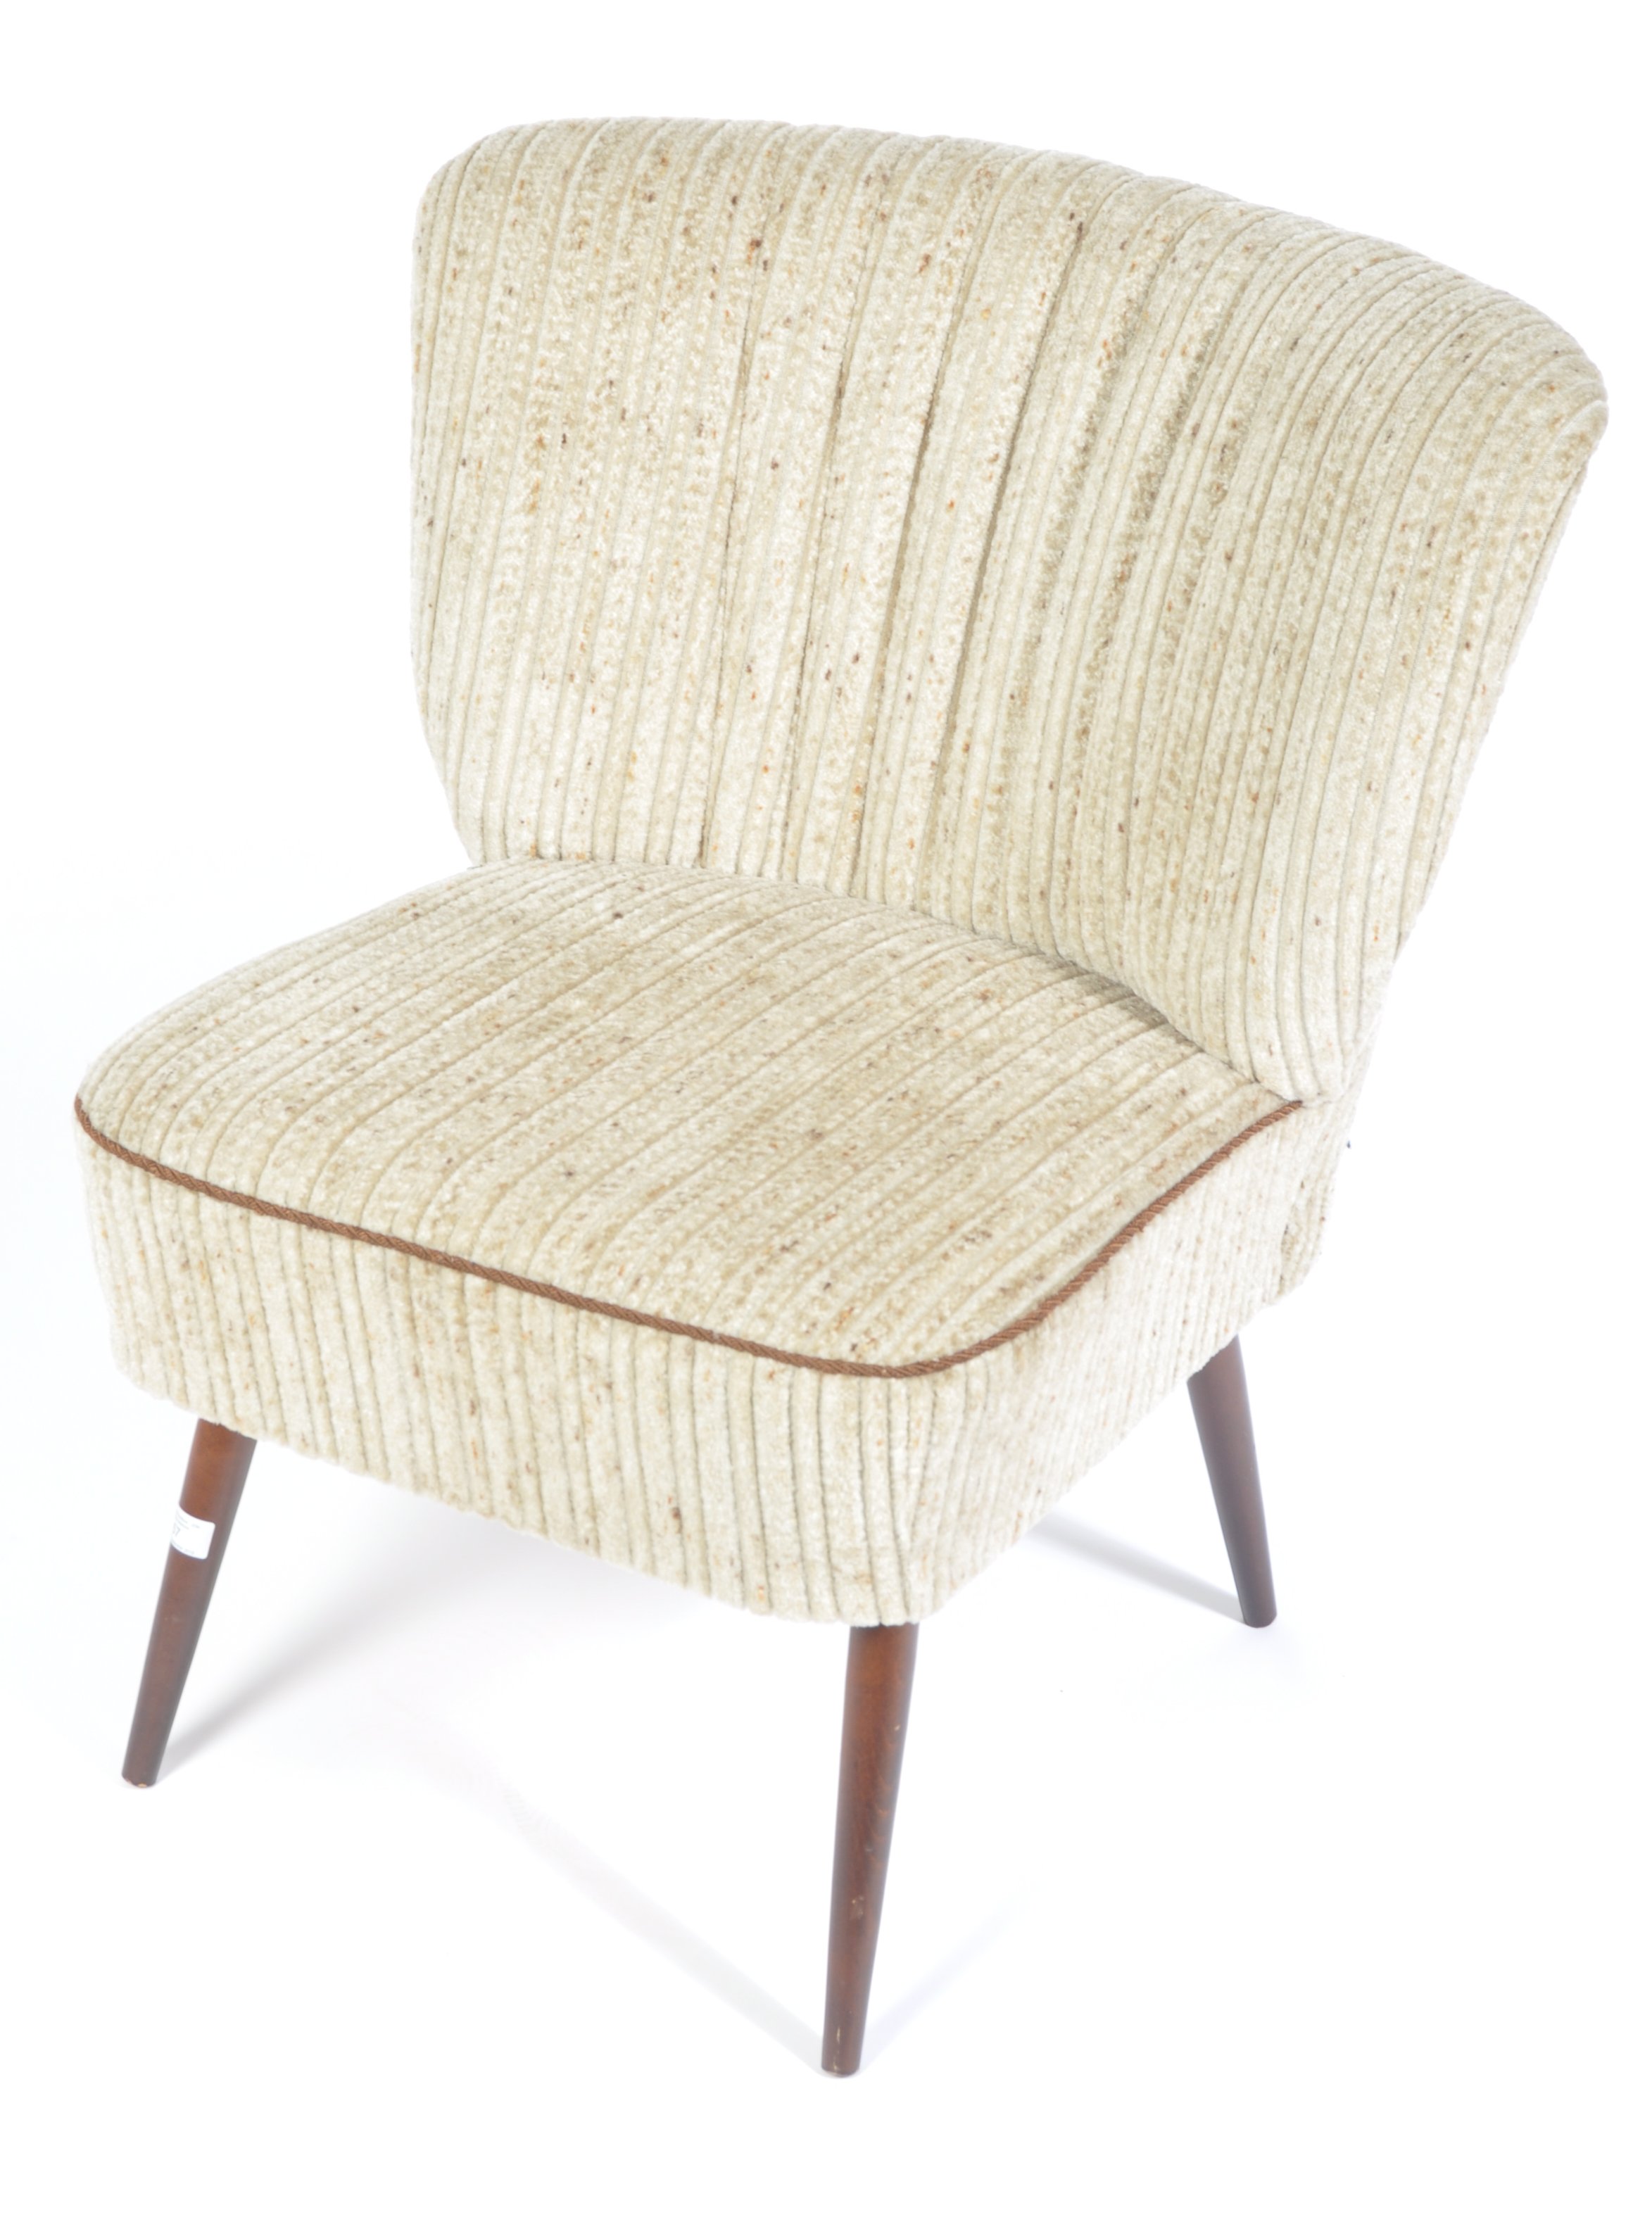 20TH CENTURY GERMAN RETRO VINTAGE SHELL BACK COCKTAIL CHAIR - Image 2 of 4